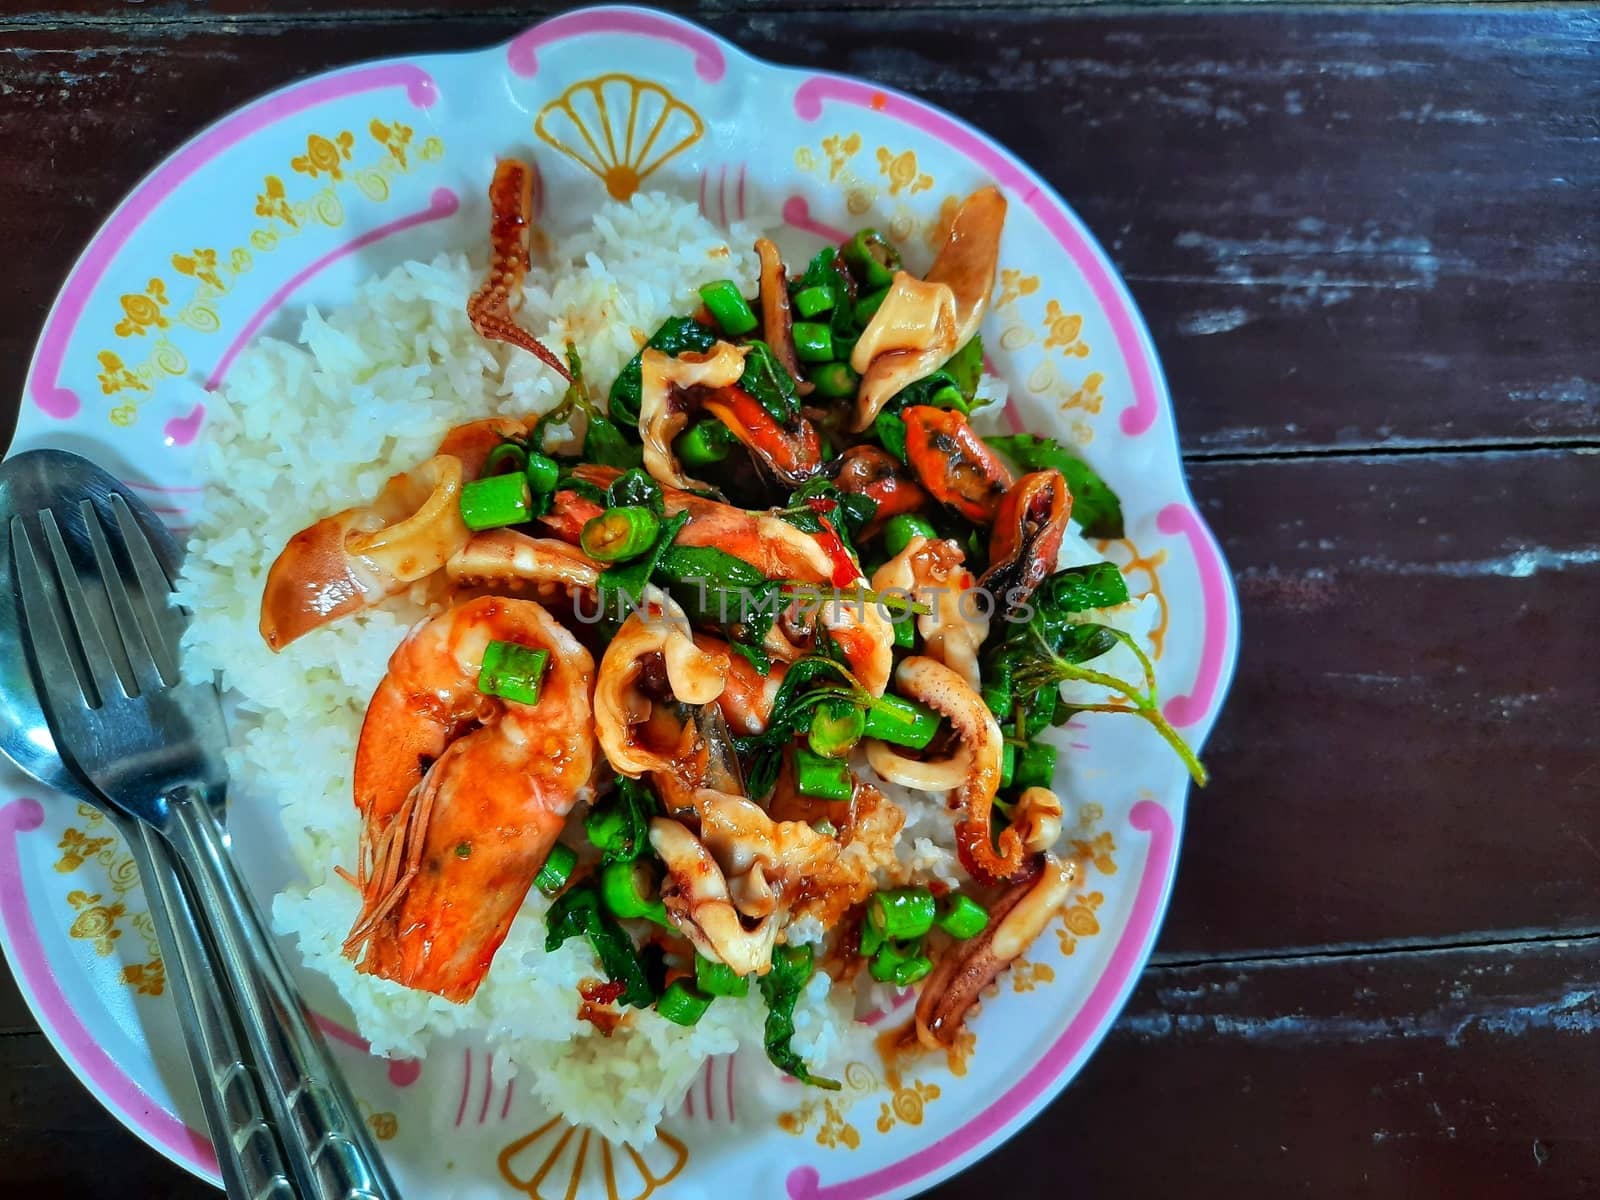 Rice topped with stir-fried seafood and basil by peerapixs